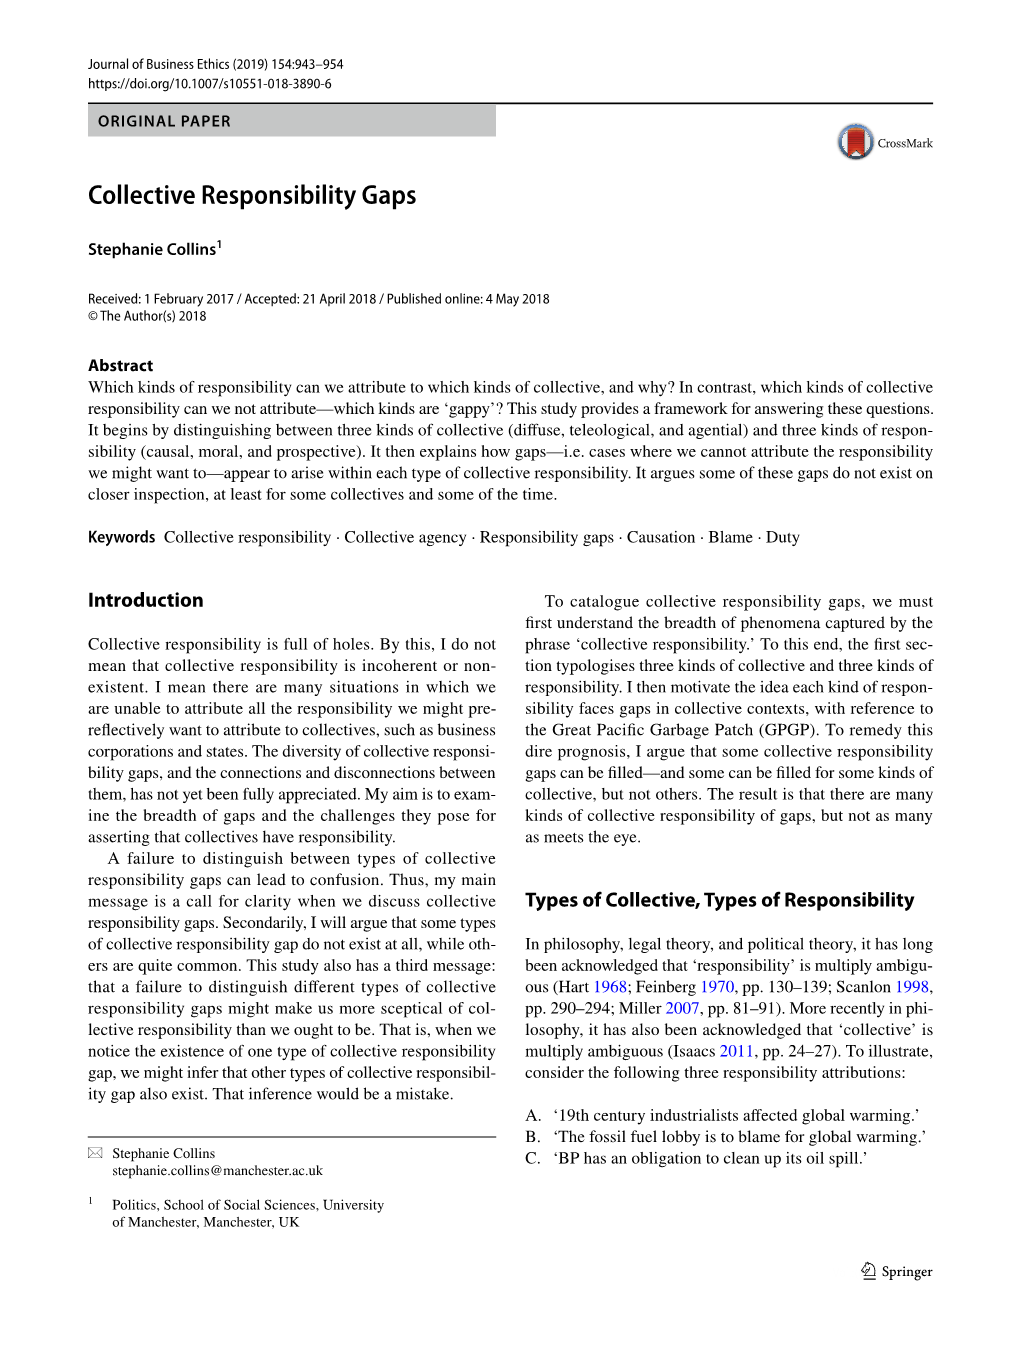 Collective Responsibility Gaps